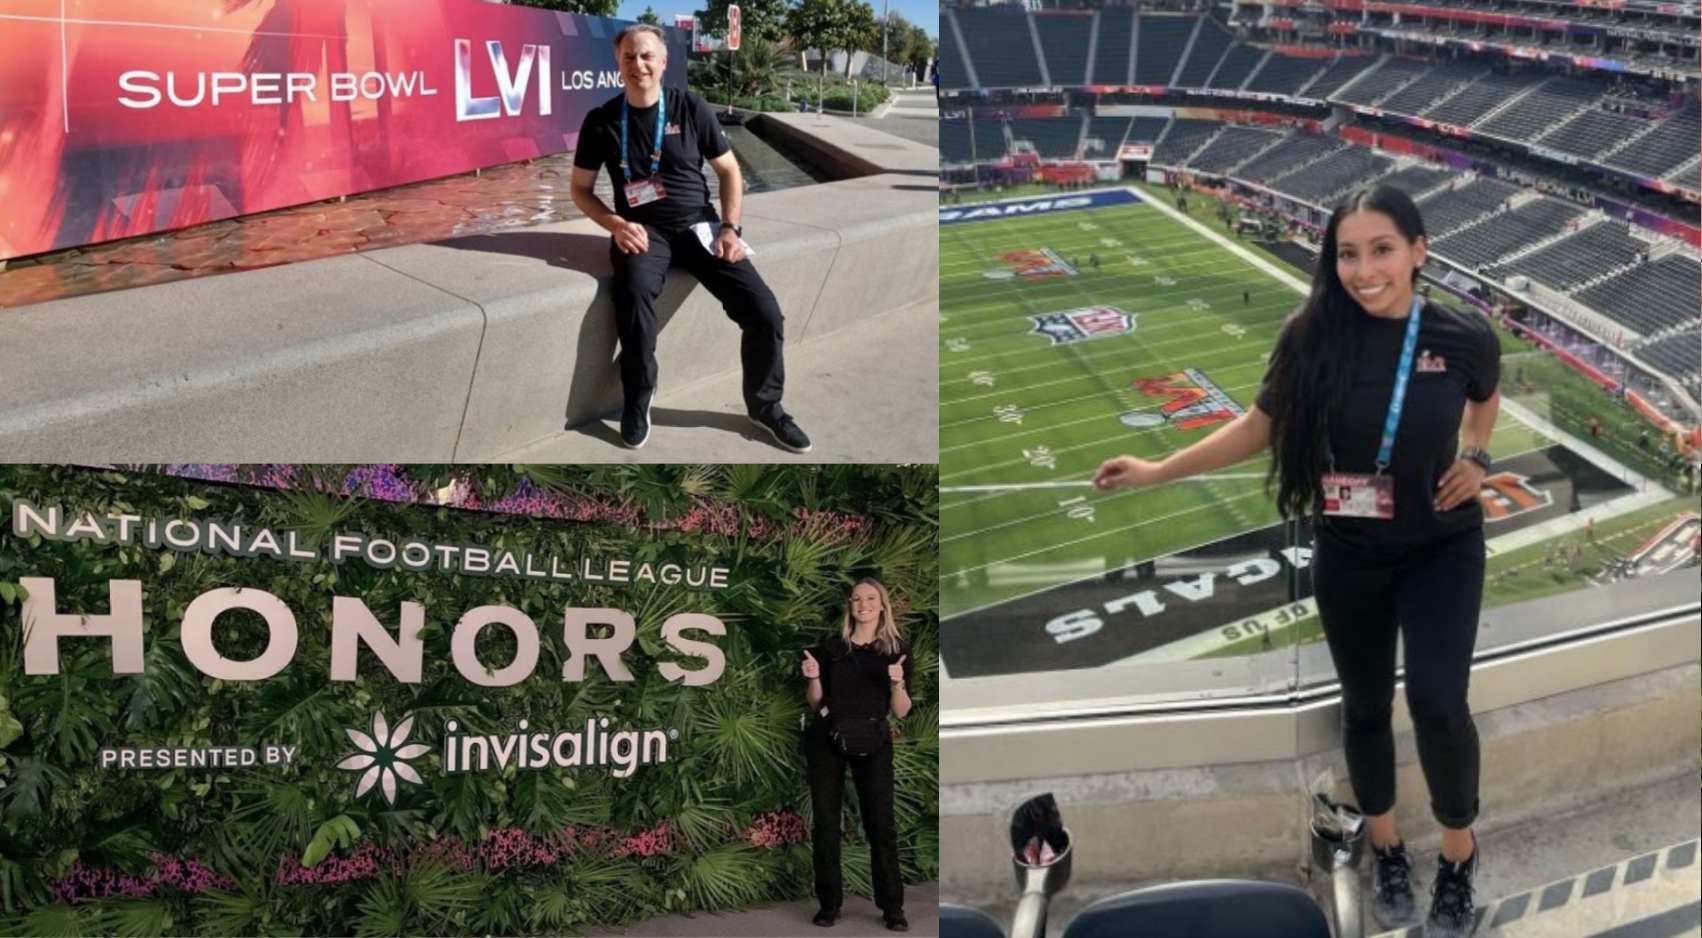 Jim Wilkie (top left) Laurel Smith (bottom left) and Angelica Gamez (right) are photographed during Super Bowl LVI at SoFi Stadium in Los Angeles.